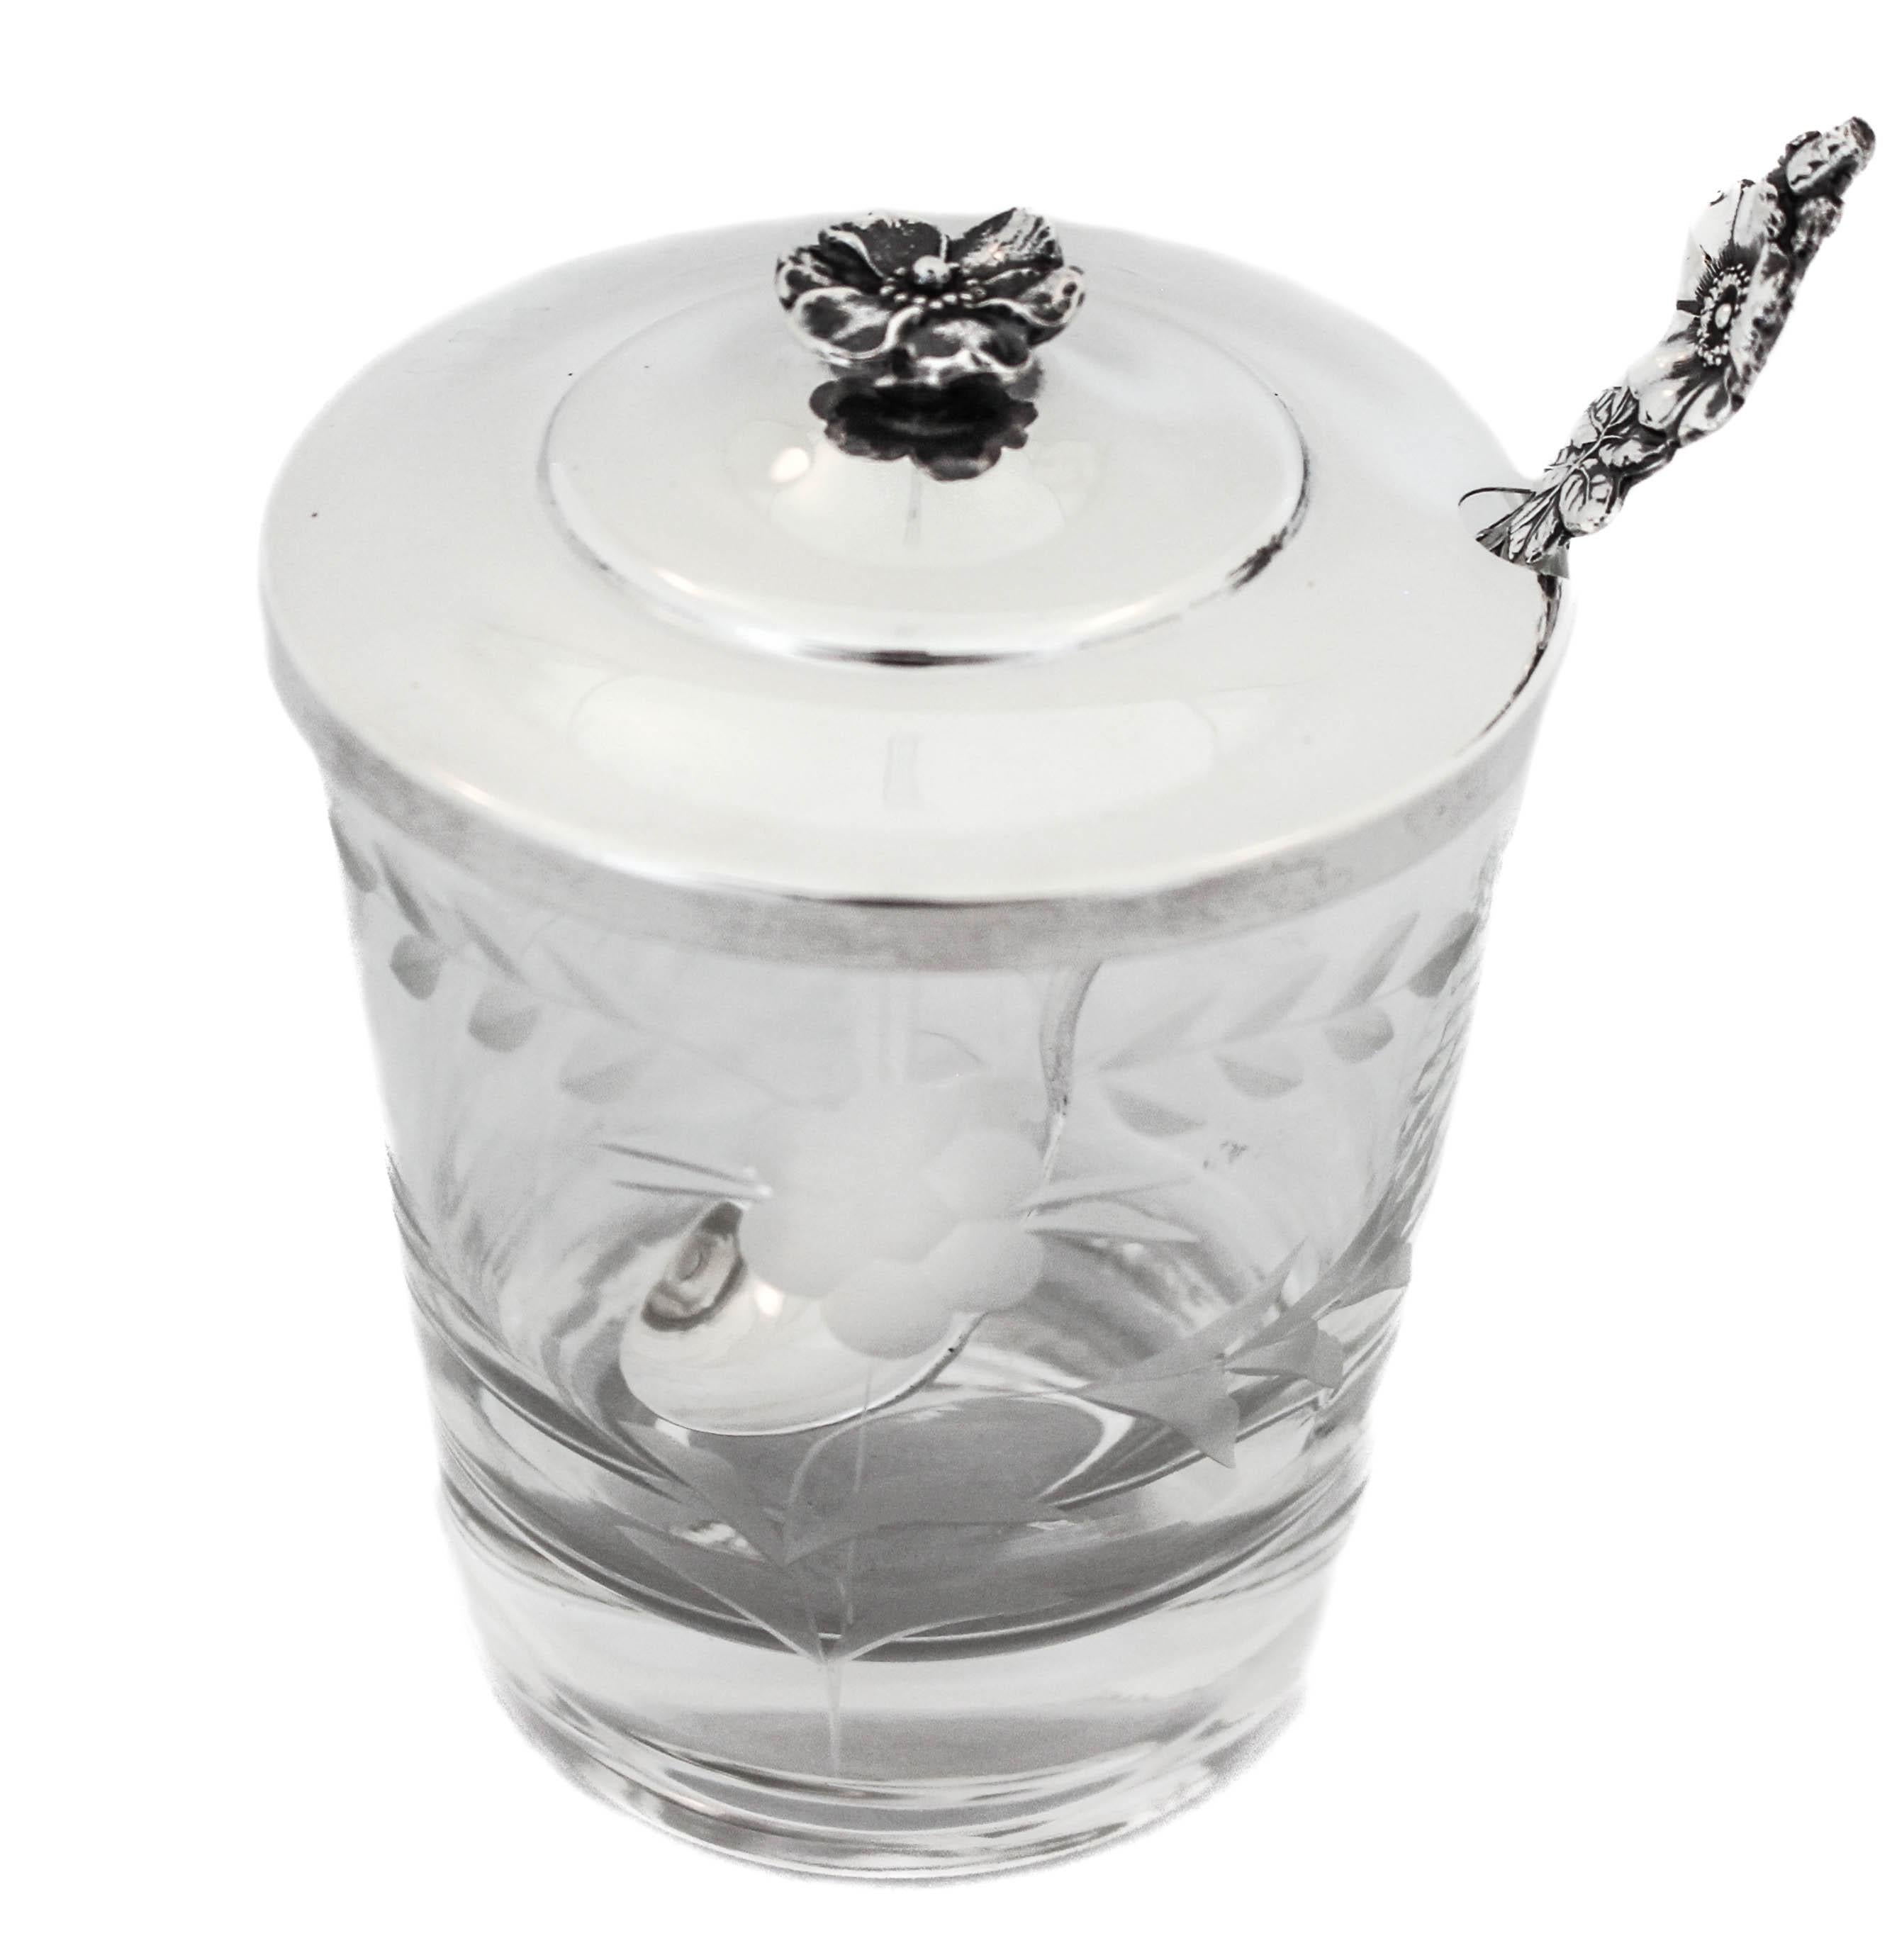 This sterling silver and crystal jar and spoon are made by Reed and Barton. The sterling lid and spoon have the same floral motif while the crystal jar has acid-etched flowers and leaves around the center. The perfect size for jam or any other